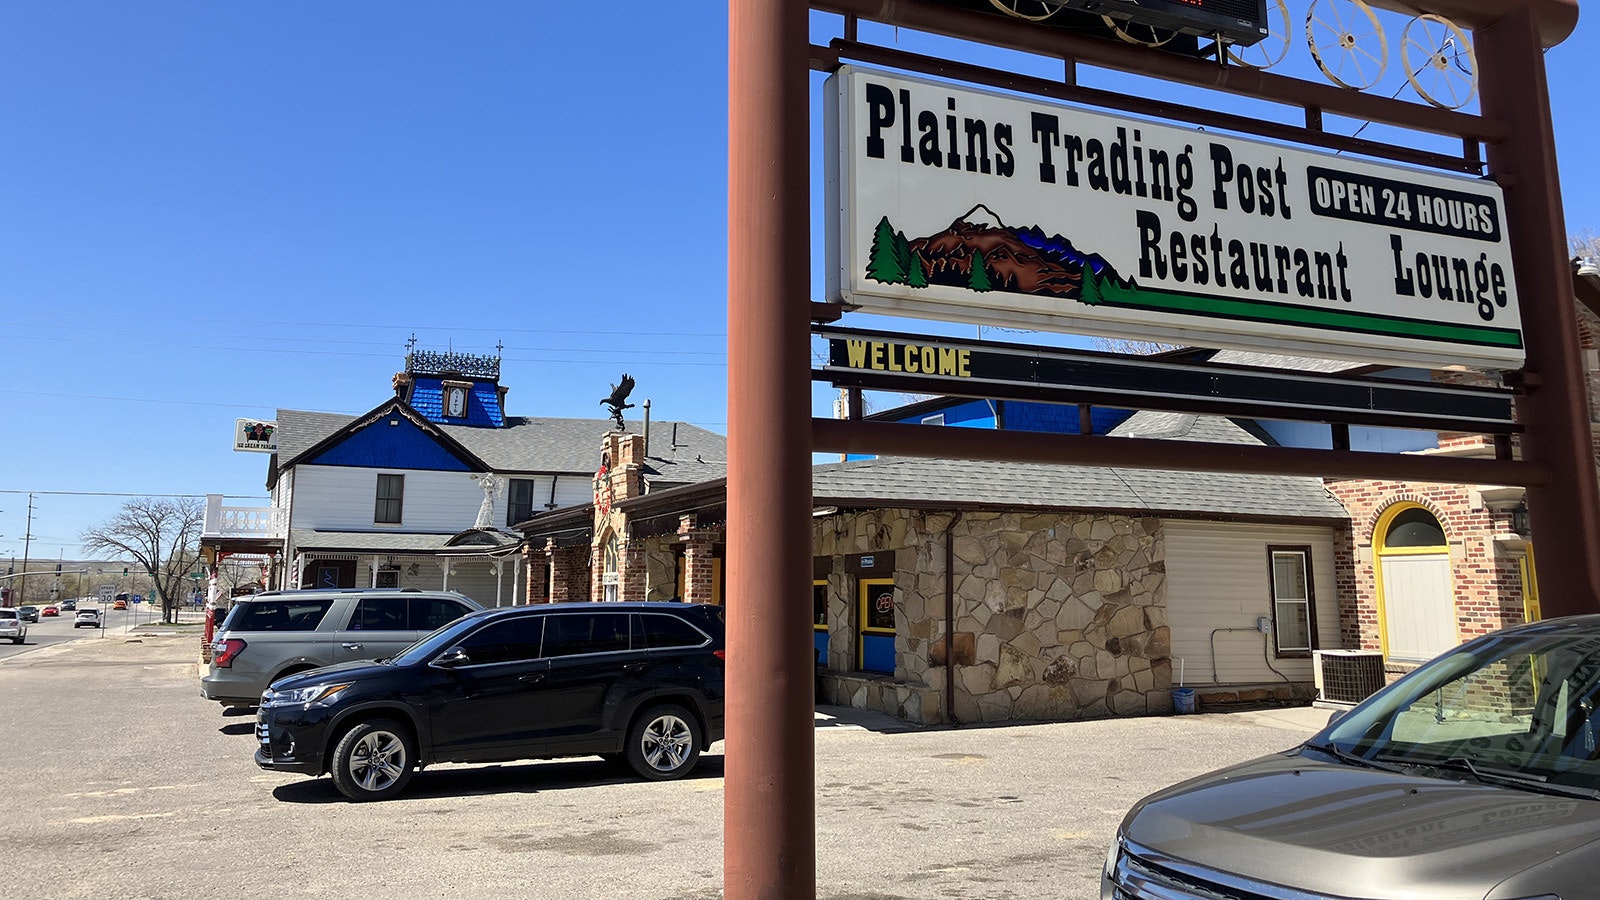 The Plains Trading Post in Douglas contains several historic structures that have been architecturally combined into an ice cream parlor, restaurant, lounge and motel.